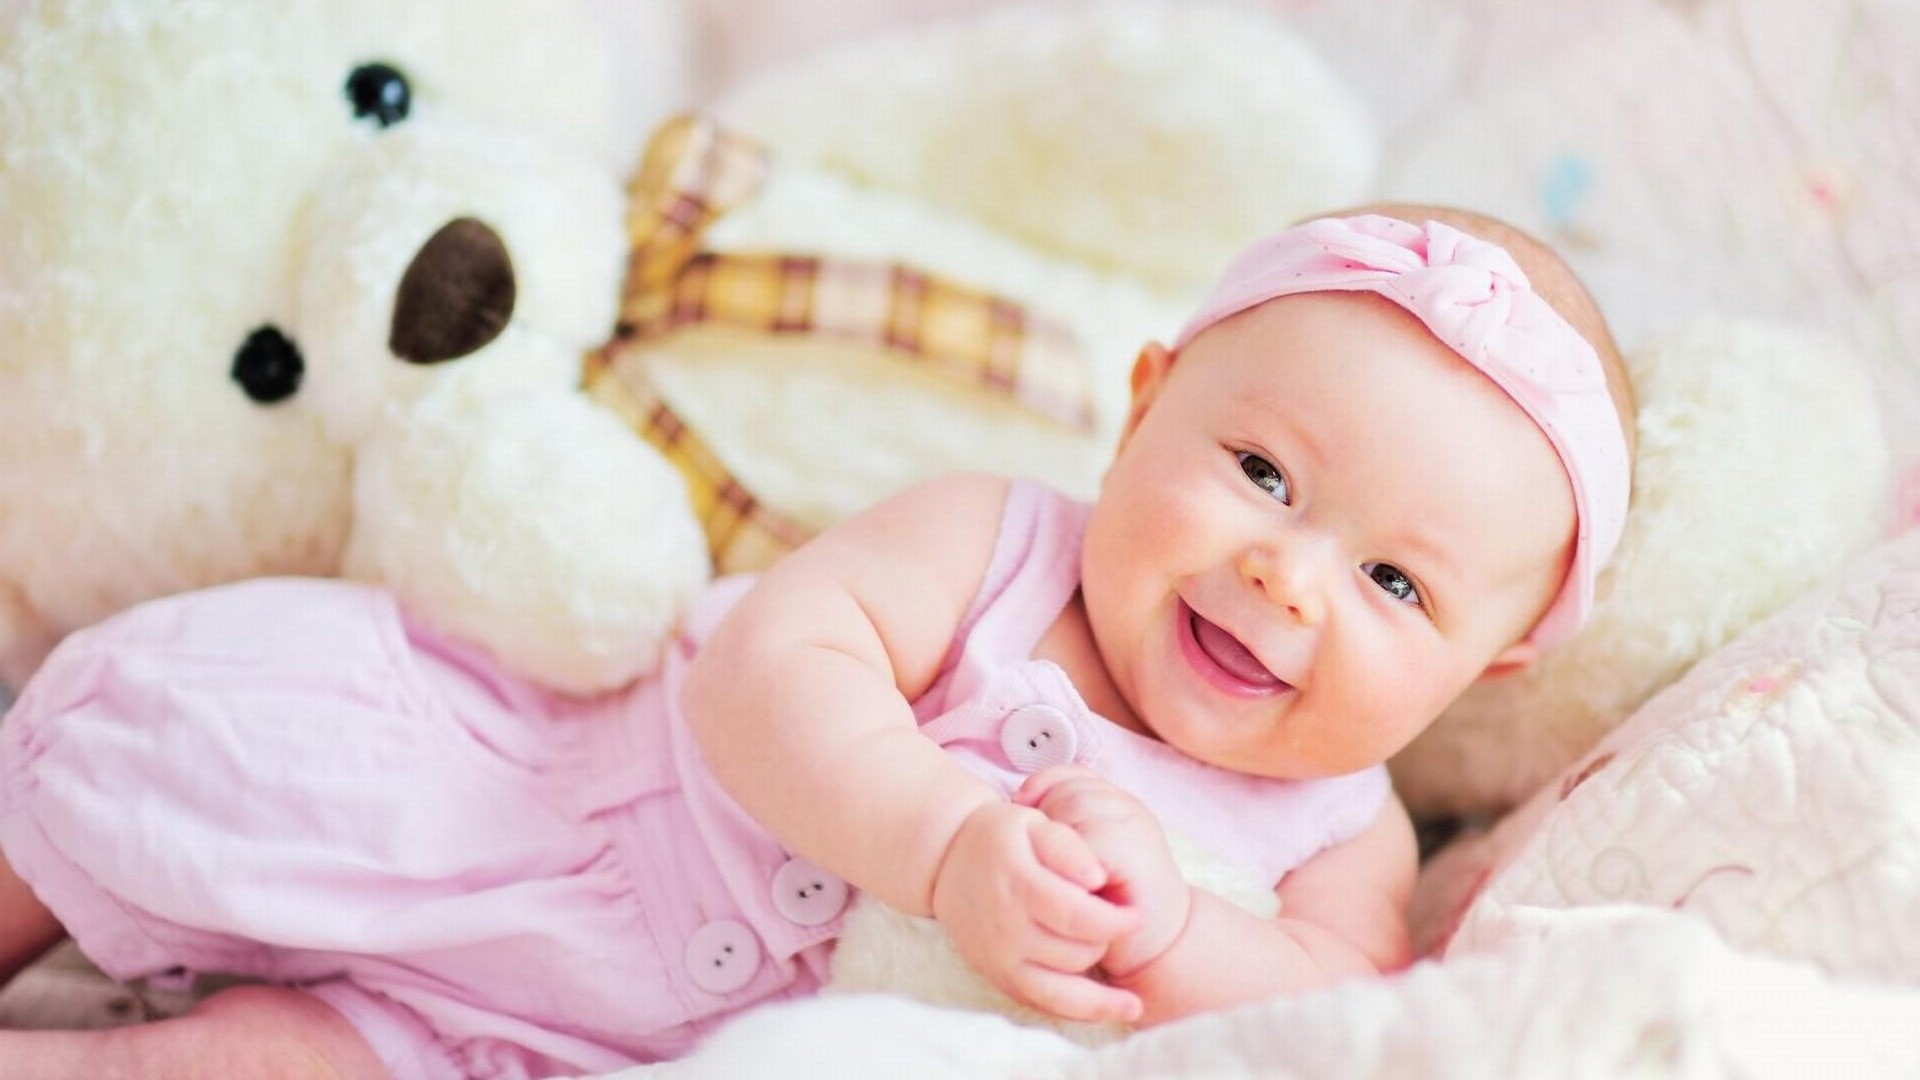 1920x1080 Most Beautiful Baby Girl Wallpapers | HD Pictures Images \u2013 HD